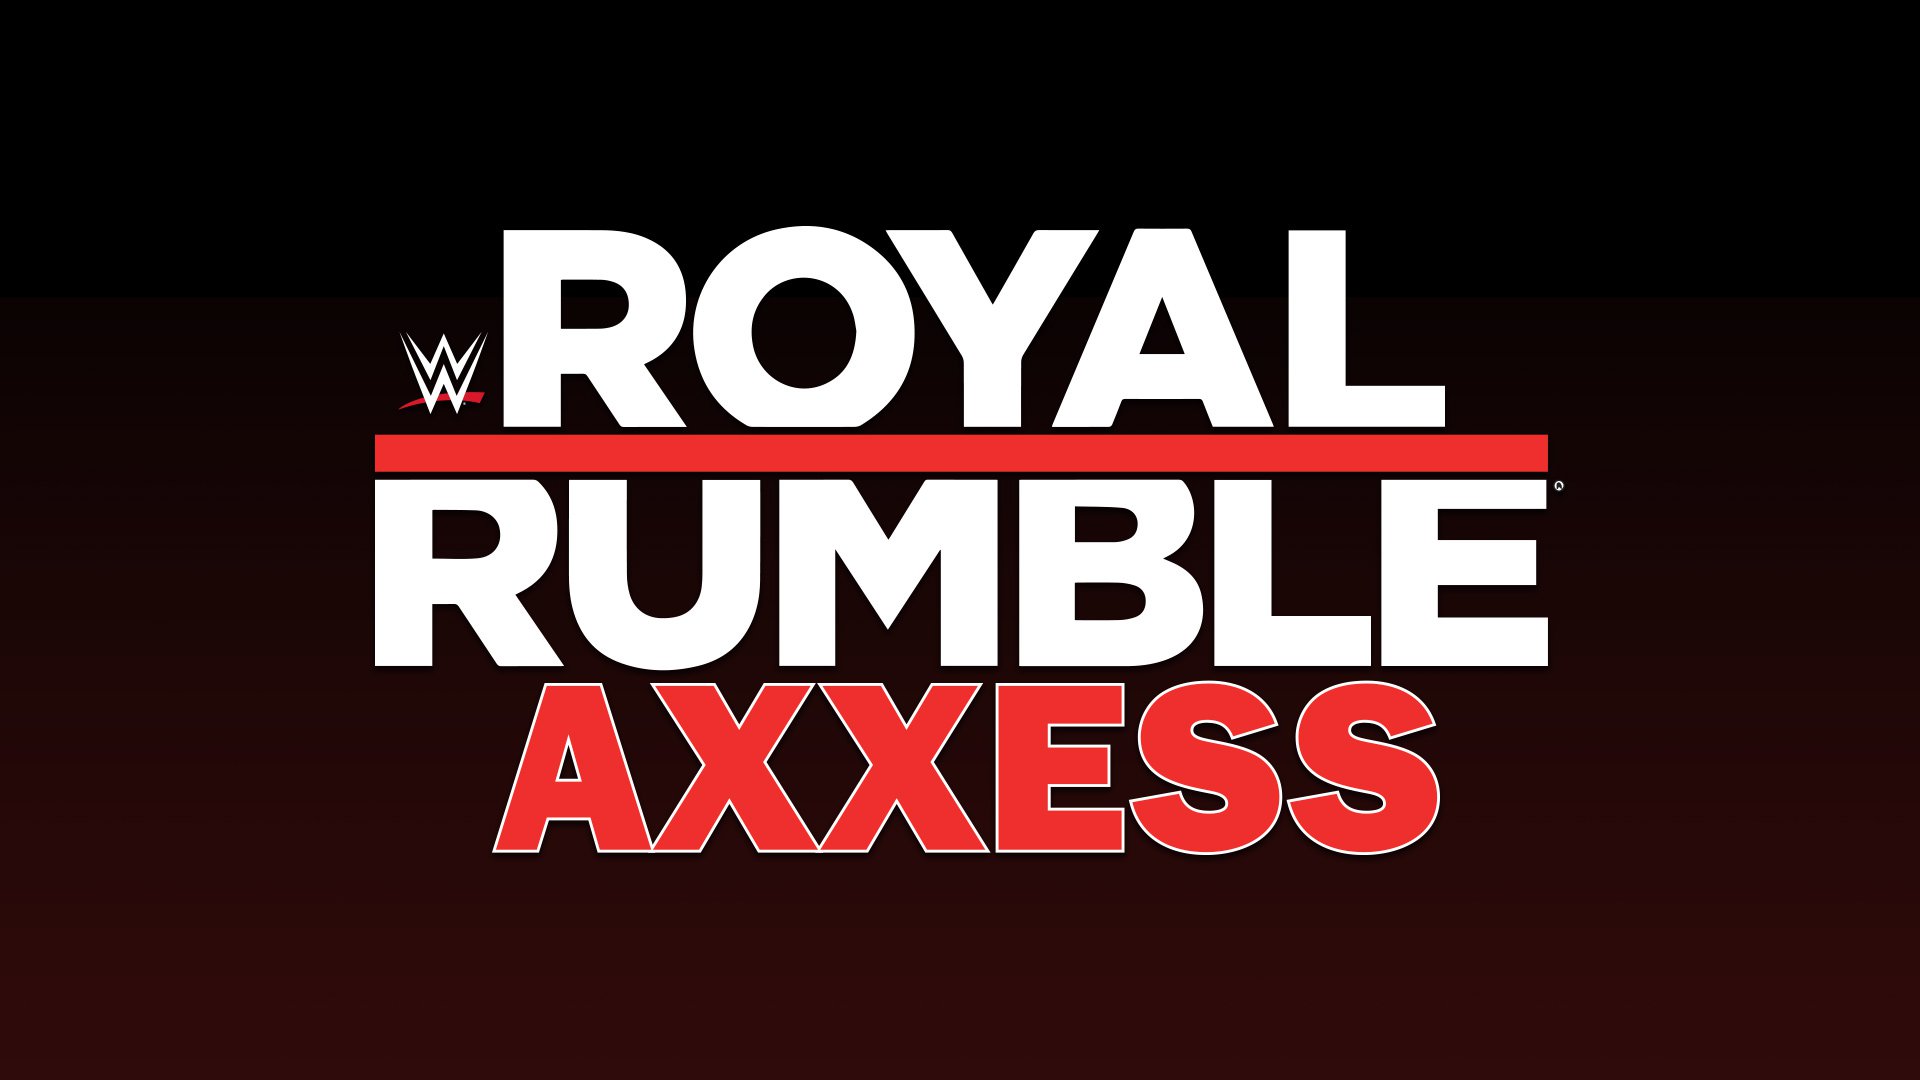 Things to know before you attend Royal Rumble Axxess WWE